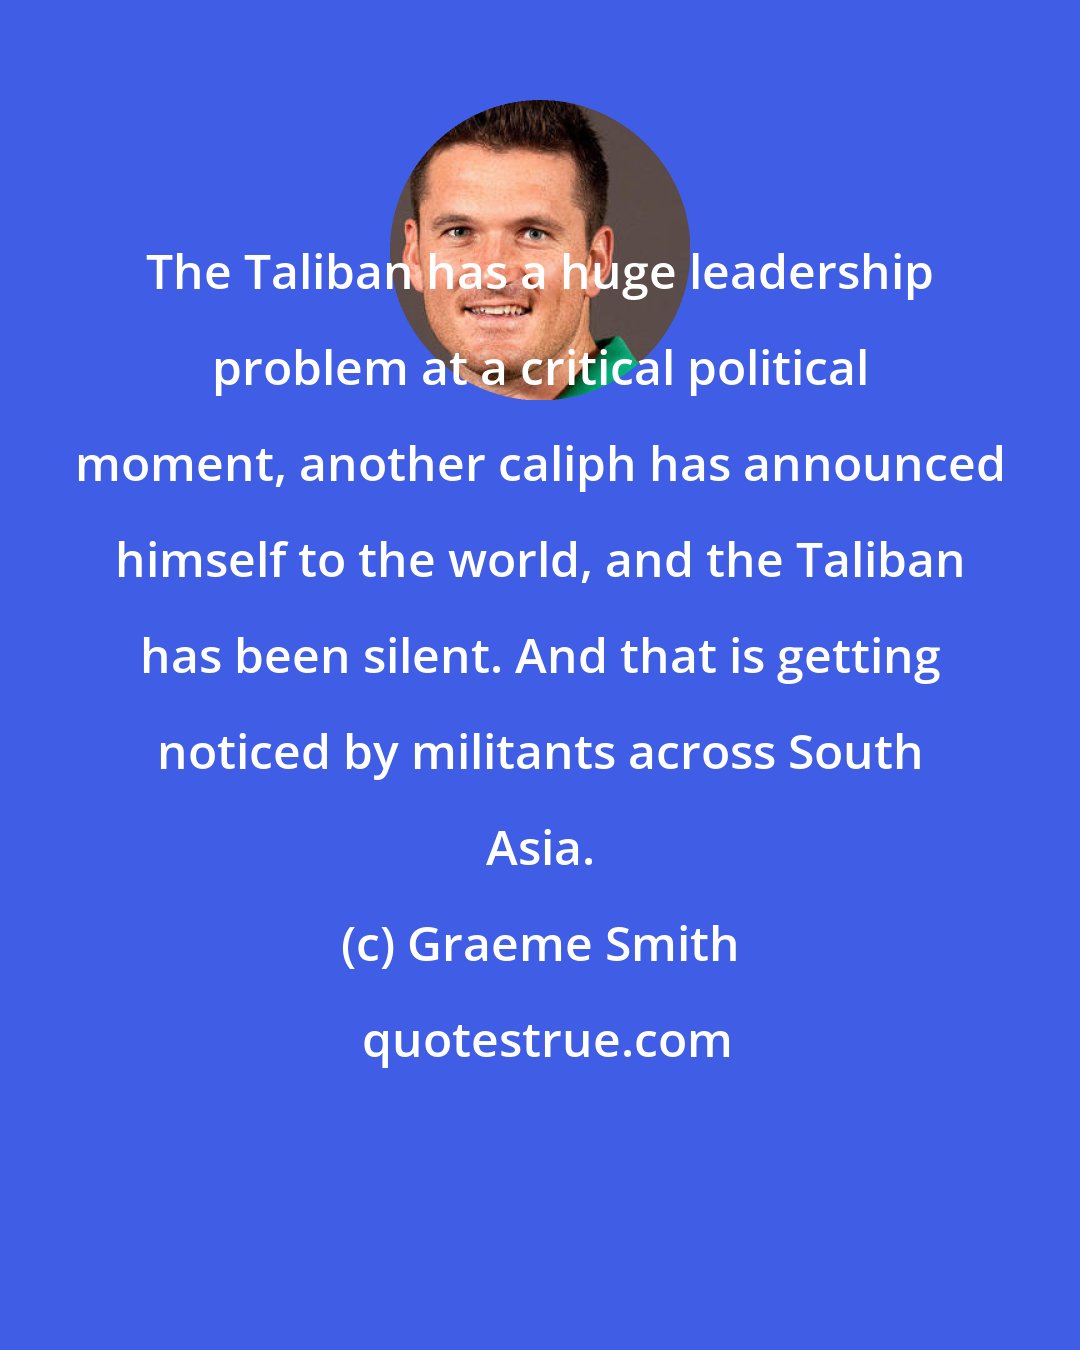 Graeme Smith: The Taliban has a huge leadership problem at a critical political moment, another caliph has announced himself to the world, and the Taliban has been silent. And that is getting noticed by militants across South Asia.